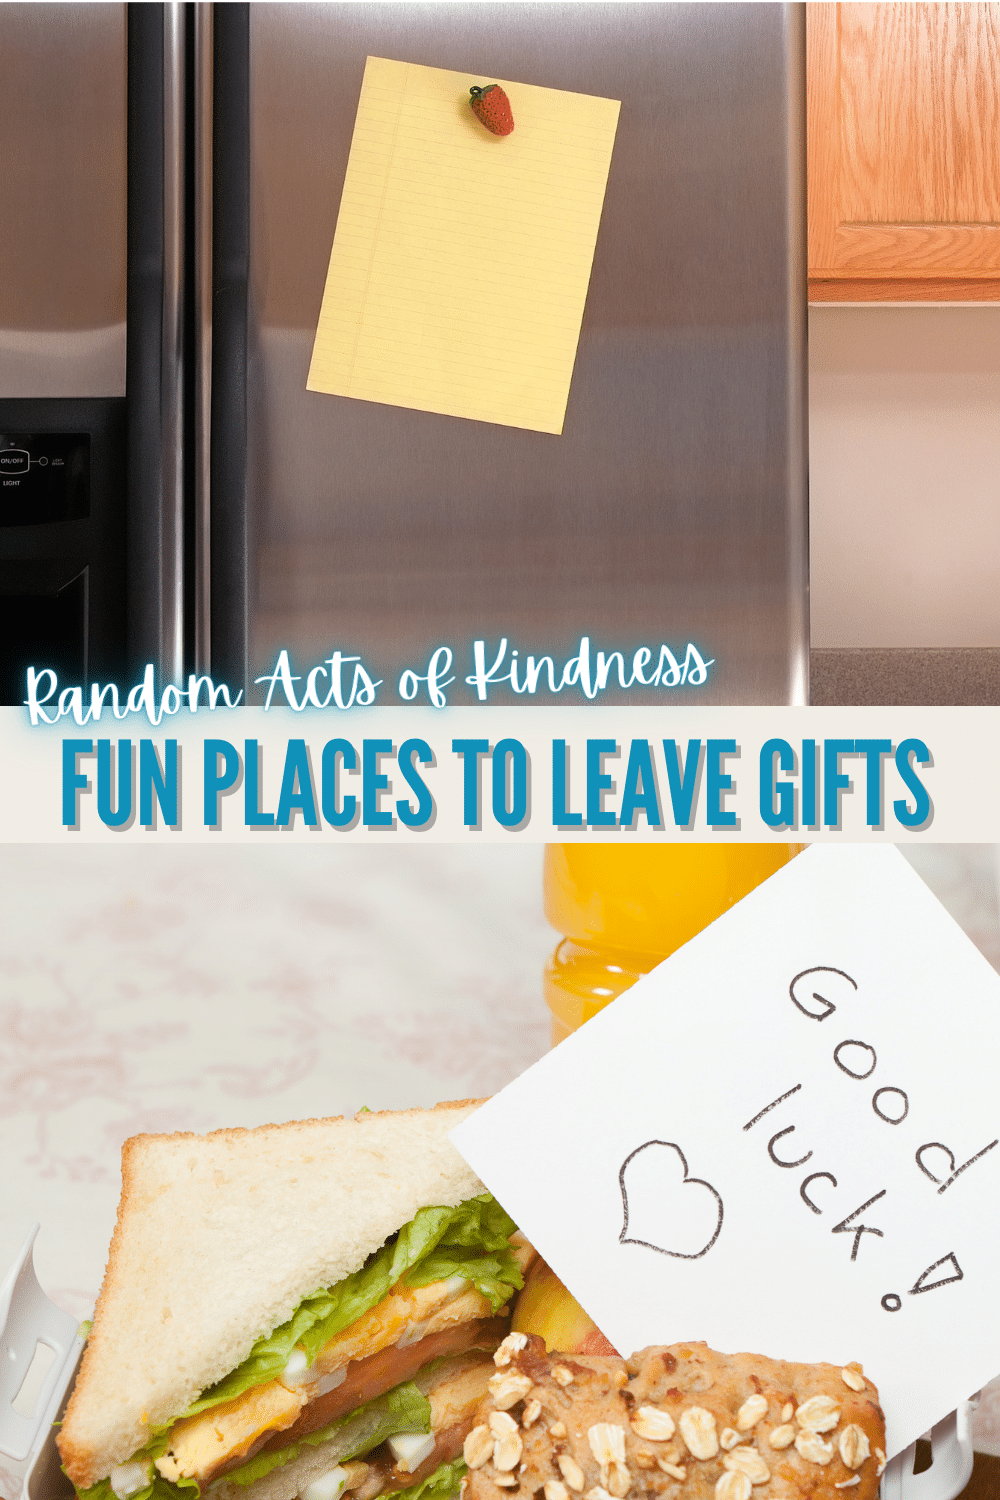 39 places where you can leave random acts of kindness gifts like friendly notes or spare change to brighten someone's day. #randomactsofkindness #kindness via @wondermomwannab